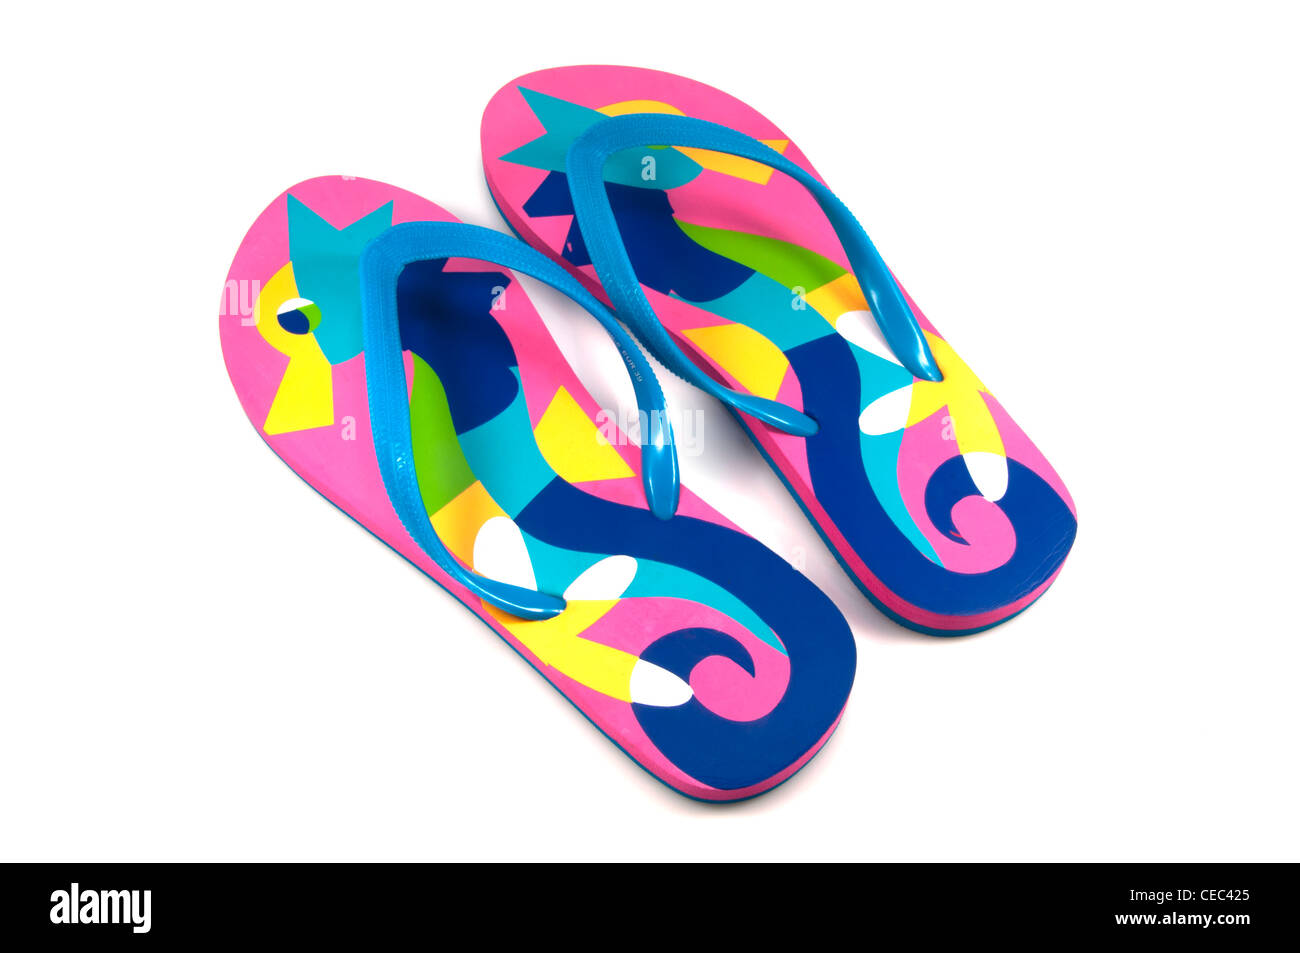 Flip flops pink colorful isolated in white background Stock Photo